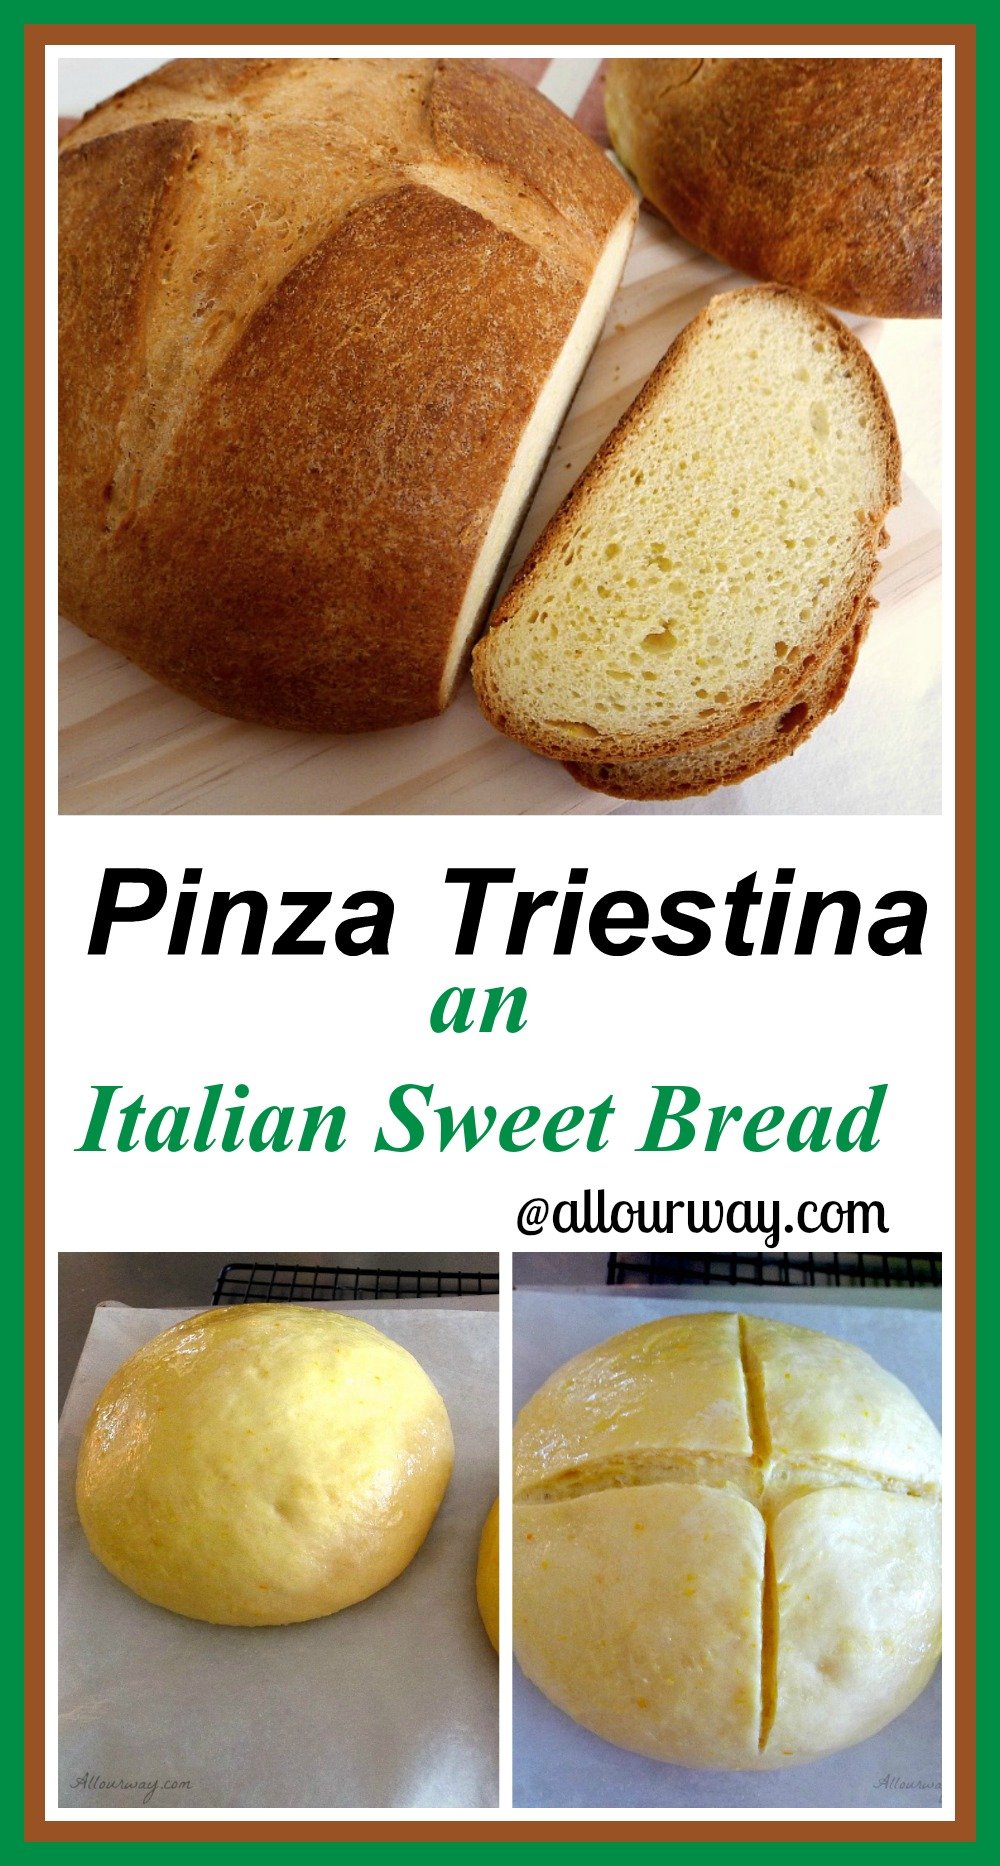 Pinza triestina is a rich egg bread such as brioche with an orange flavor. It is usually served on Easter morning but is delicious any time of year @allourway.com